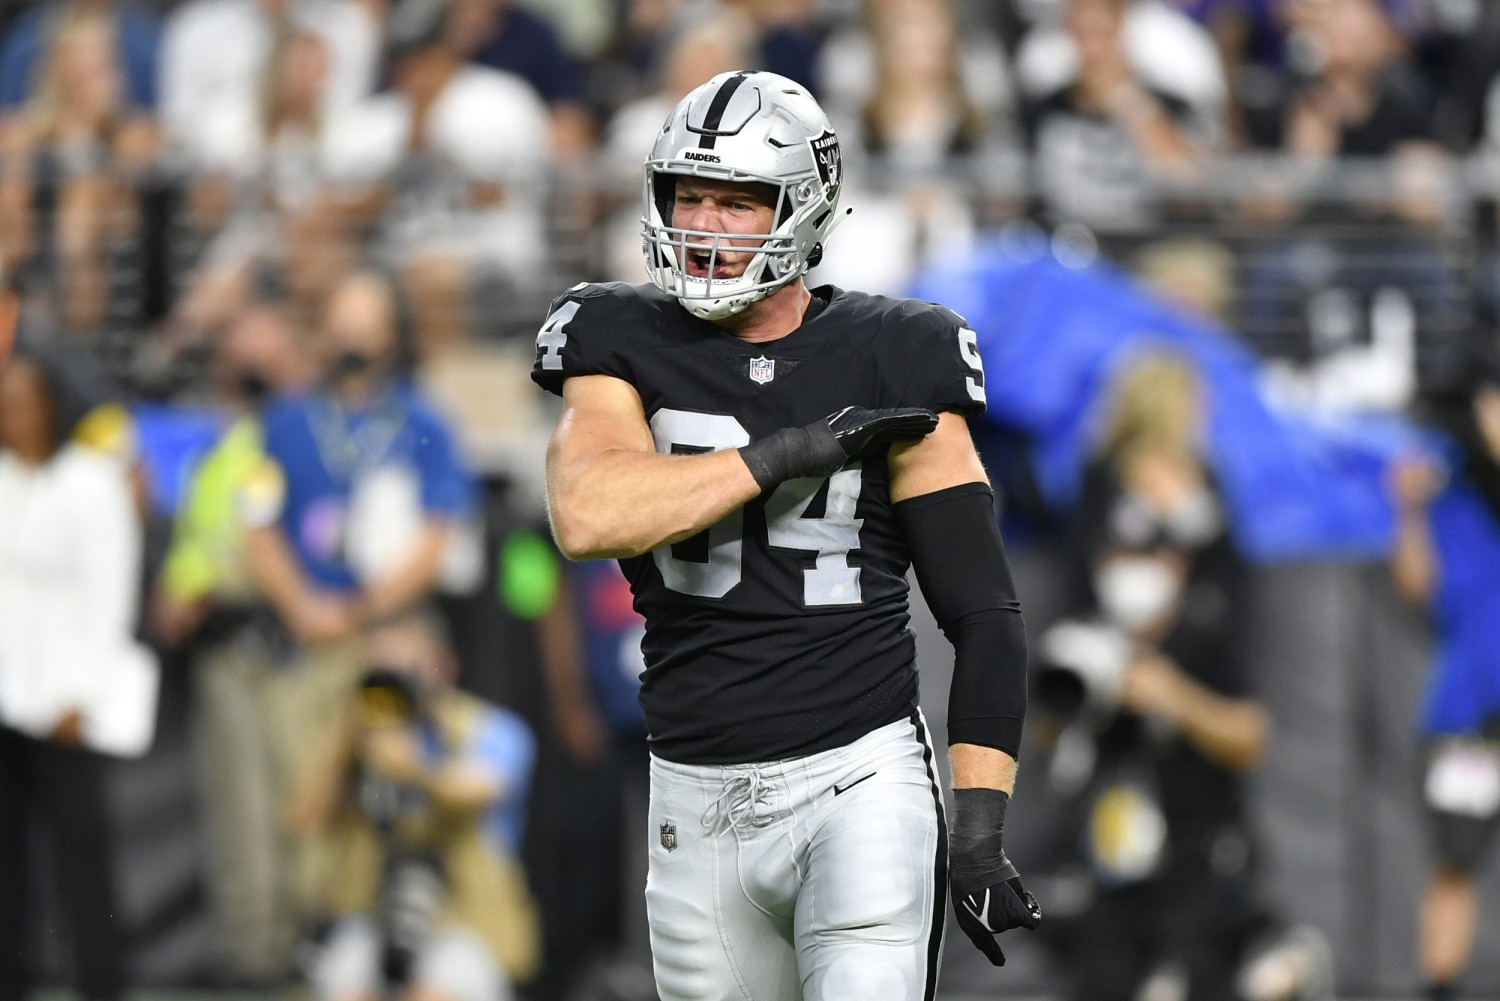 Raiders jerseys: What is Vegas wearing for Monday Night Football?